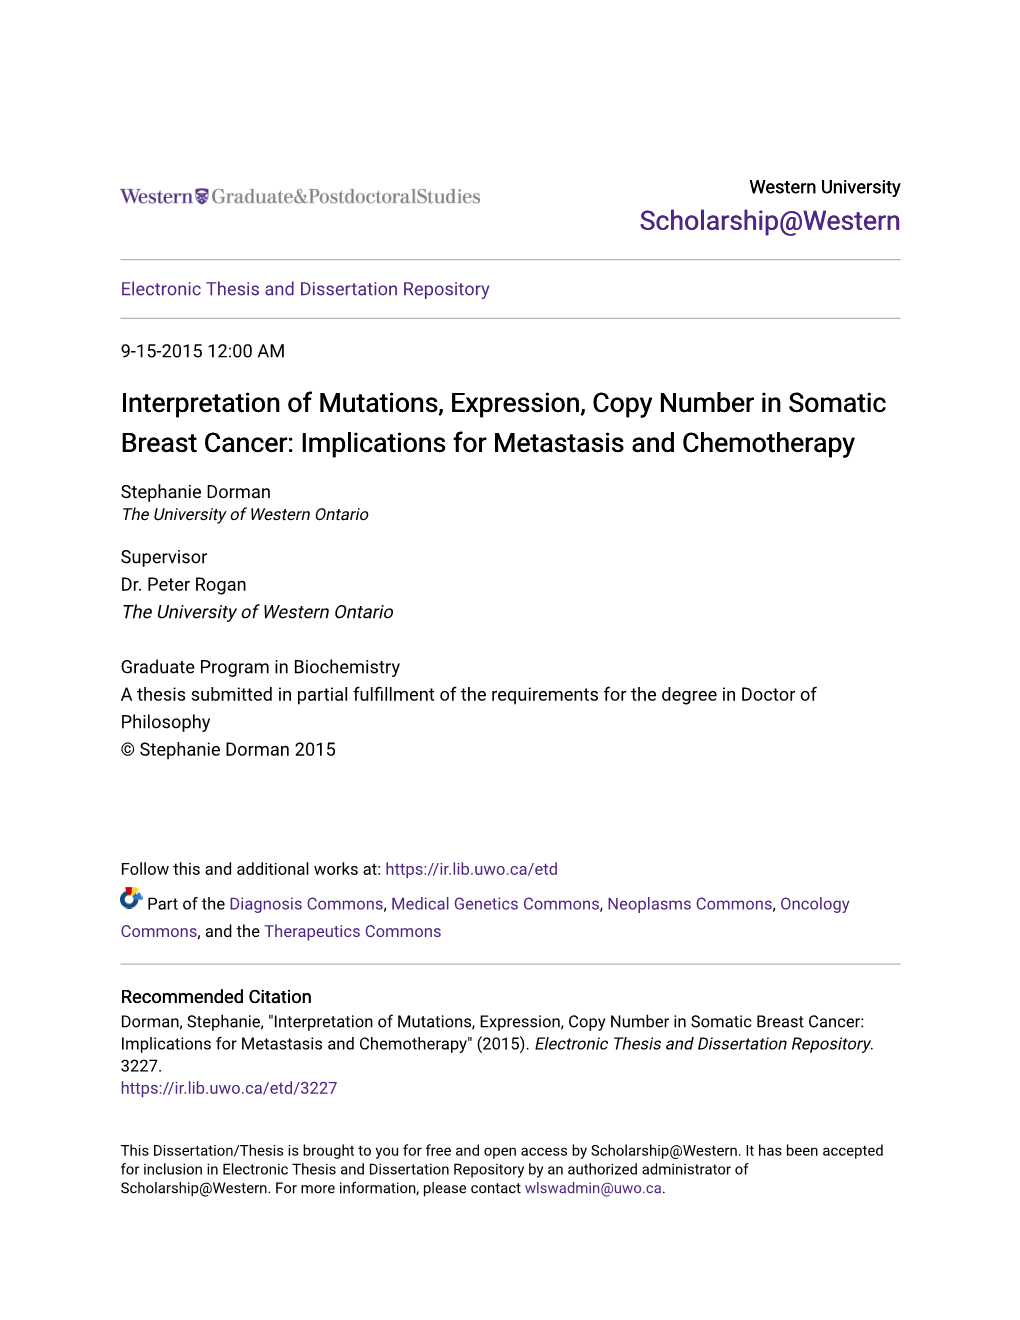 Interpretation of Mutations, Expression, Copy Number in Somatic Breast Cancer: Implications for Metastasis and Chemotherapy